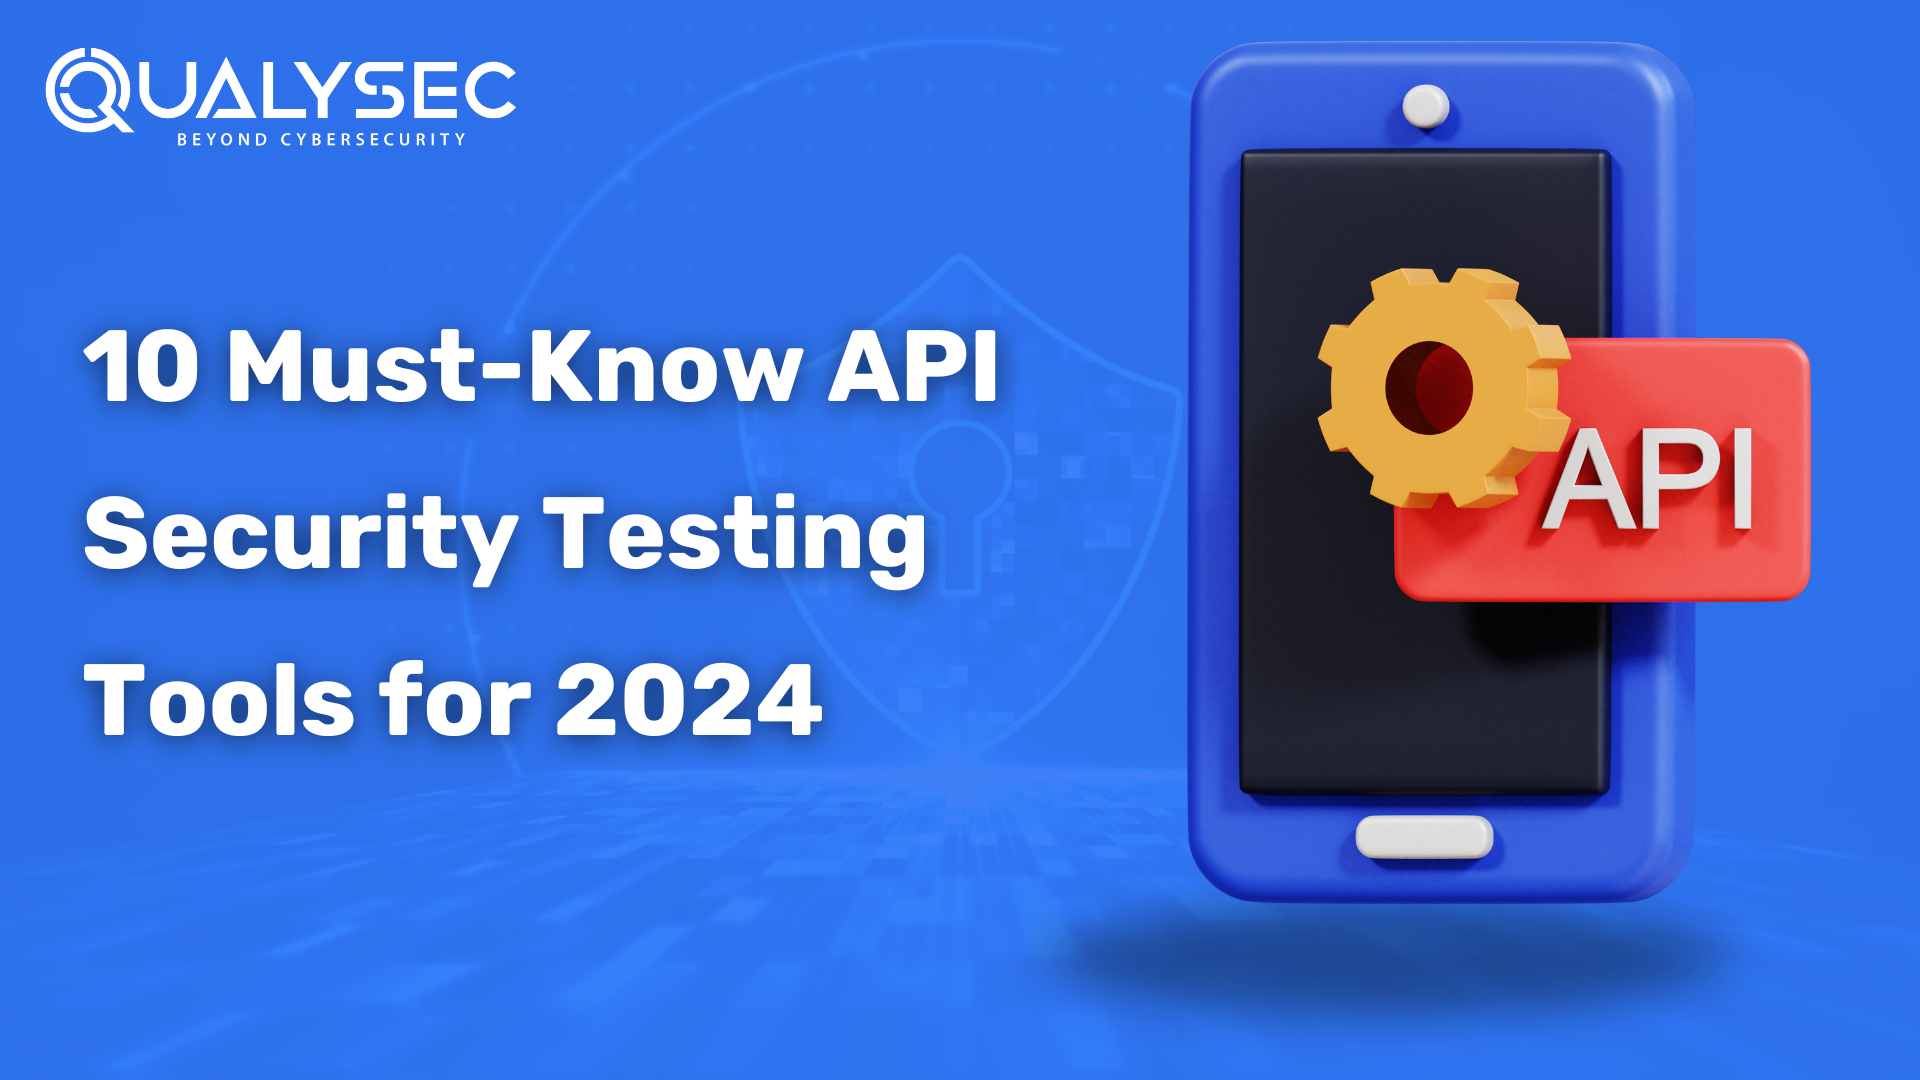 10 Must-Know API Security Testing Tools for 2024